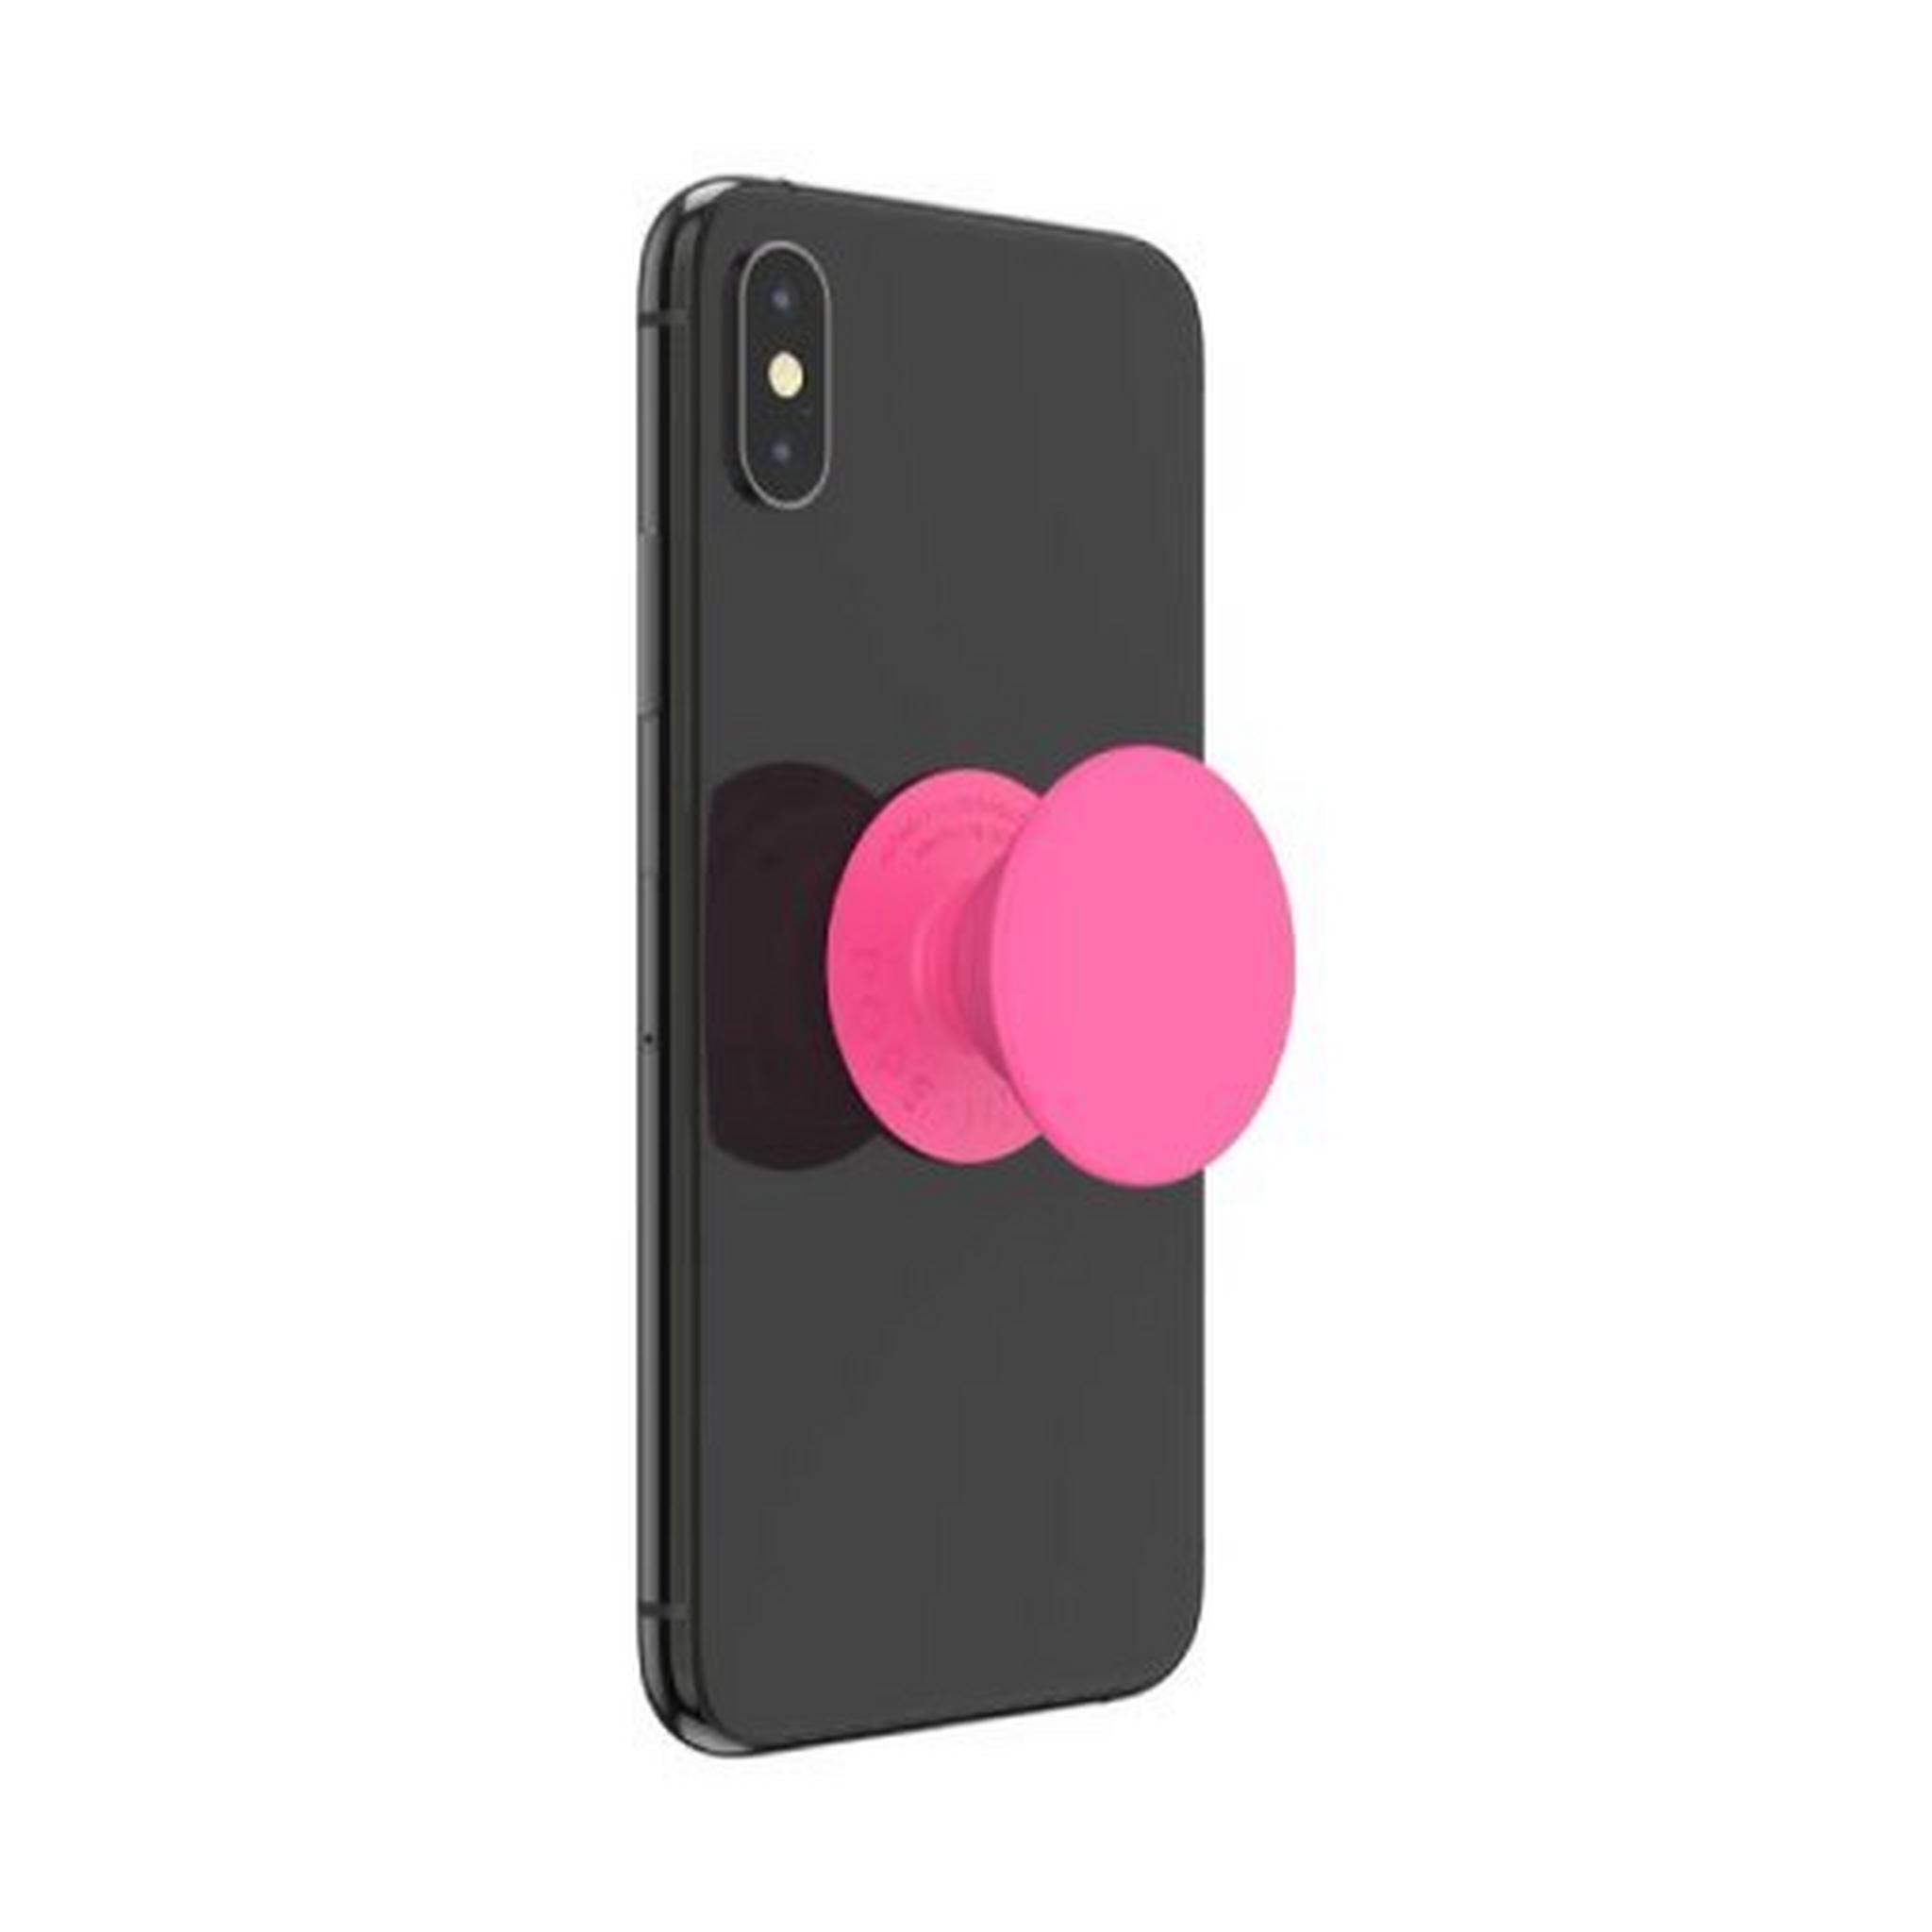 PopSockets Phone Stand and Grip (802460) – Neon Day Glo Pink